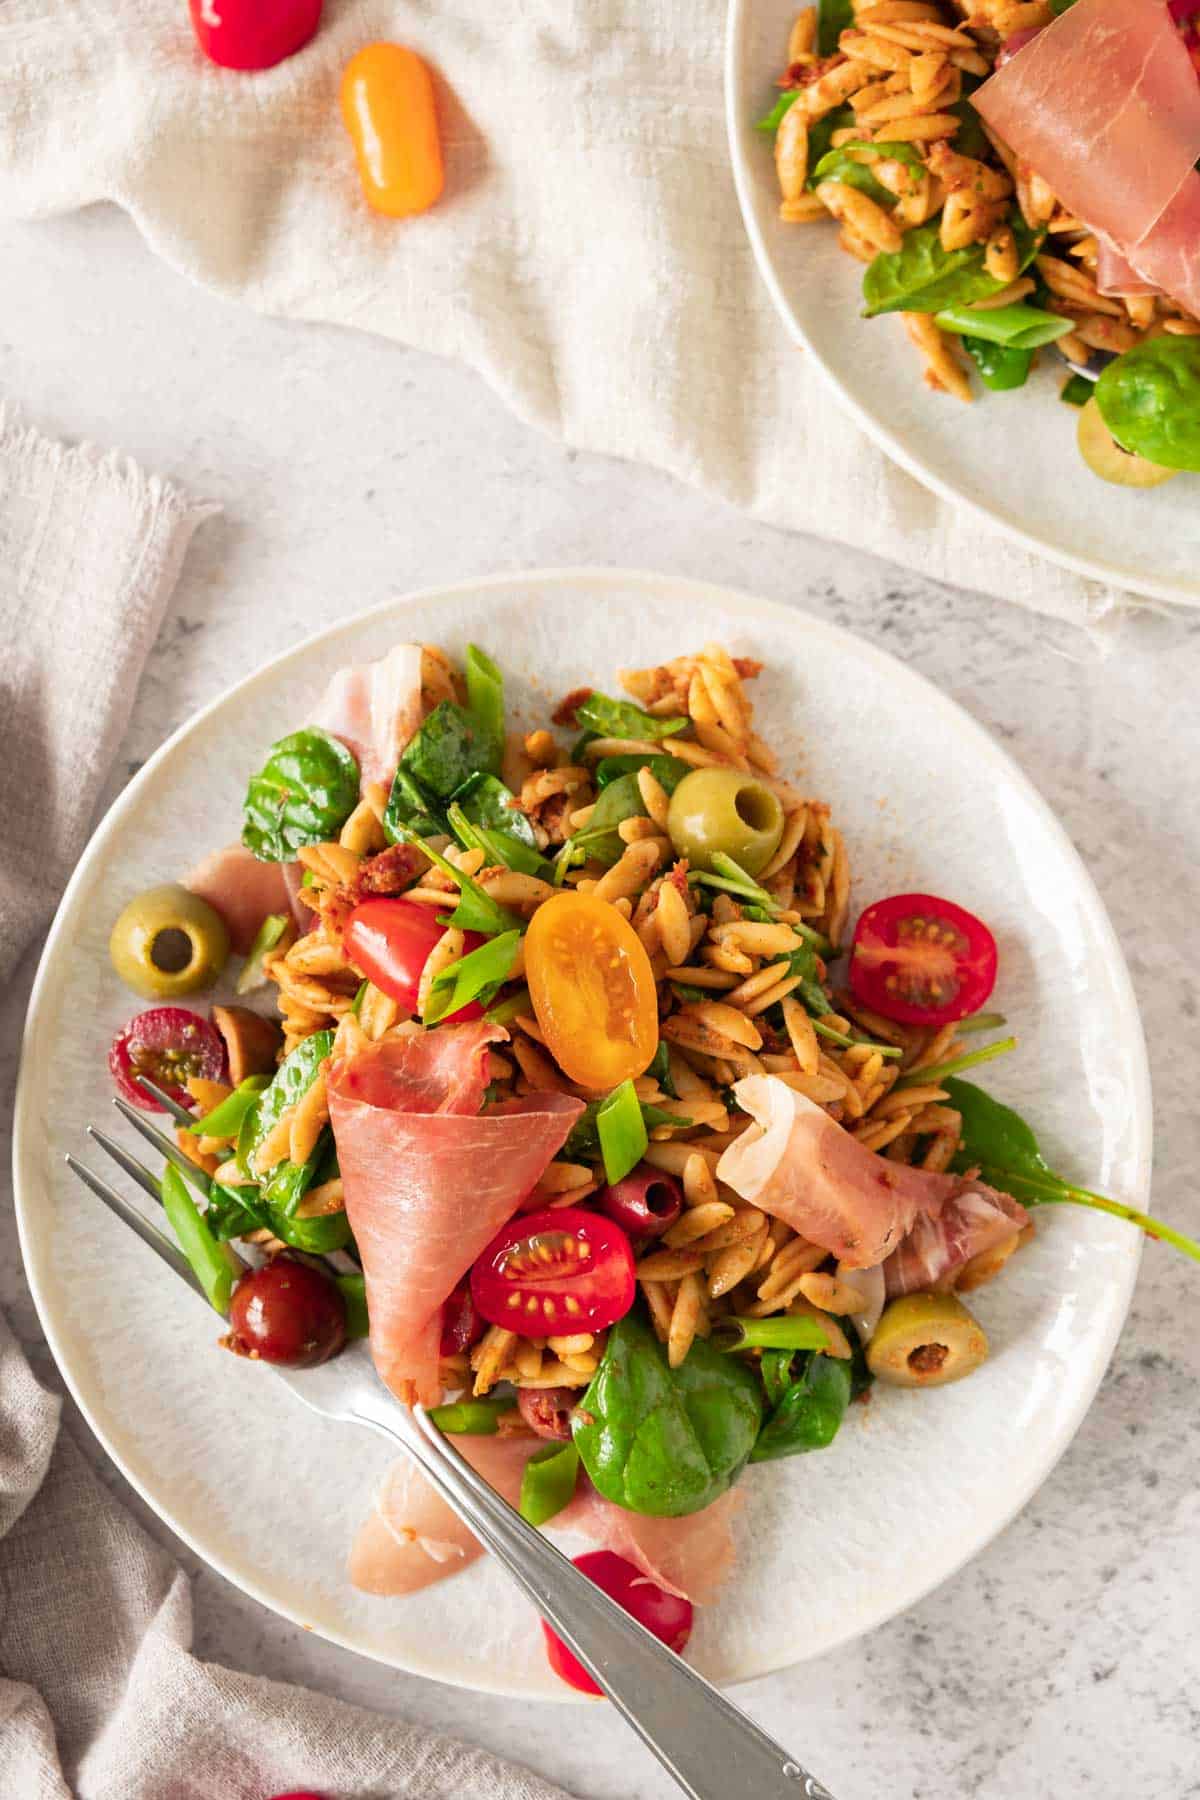 Pesto Orzo salad with parma ham, tomatoes and olives on a white plate.